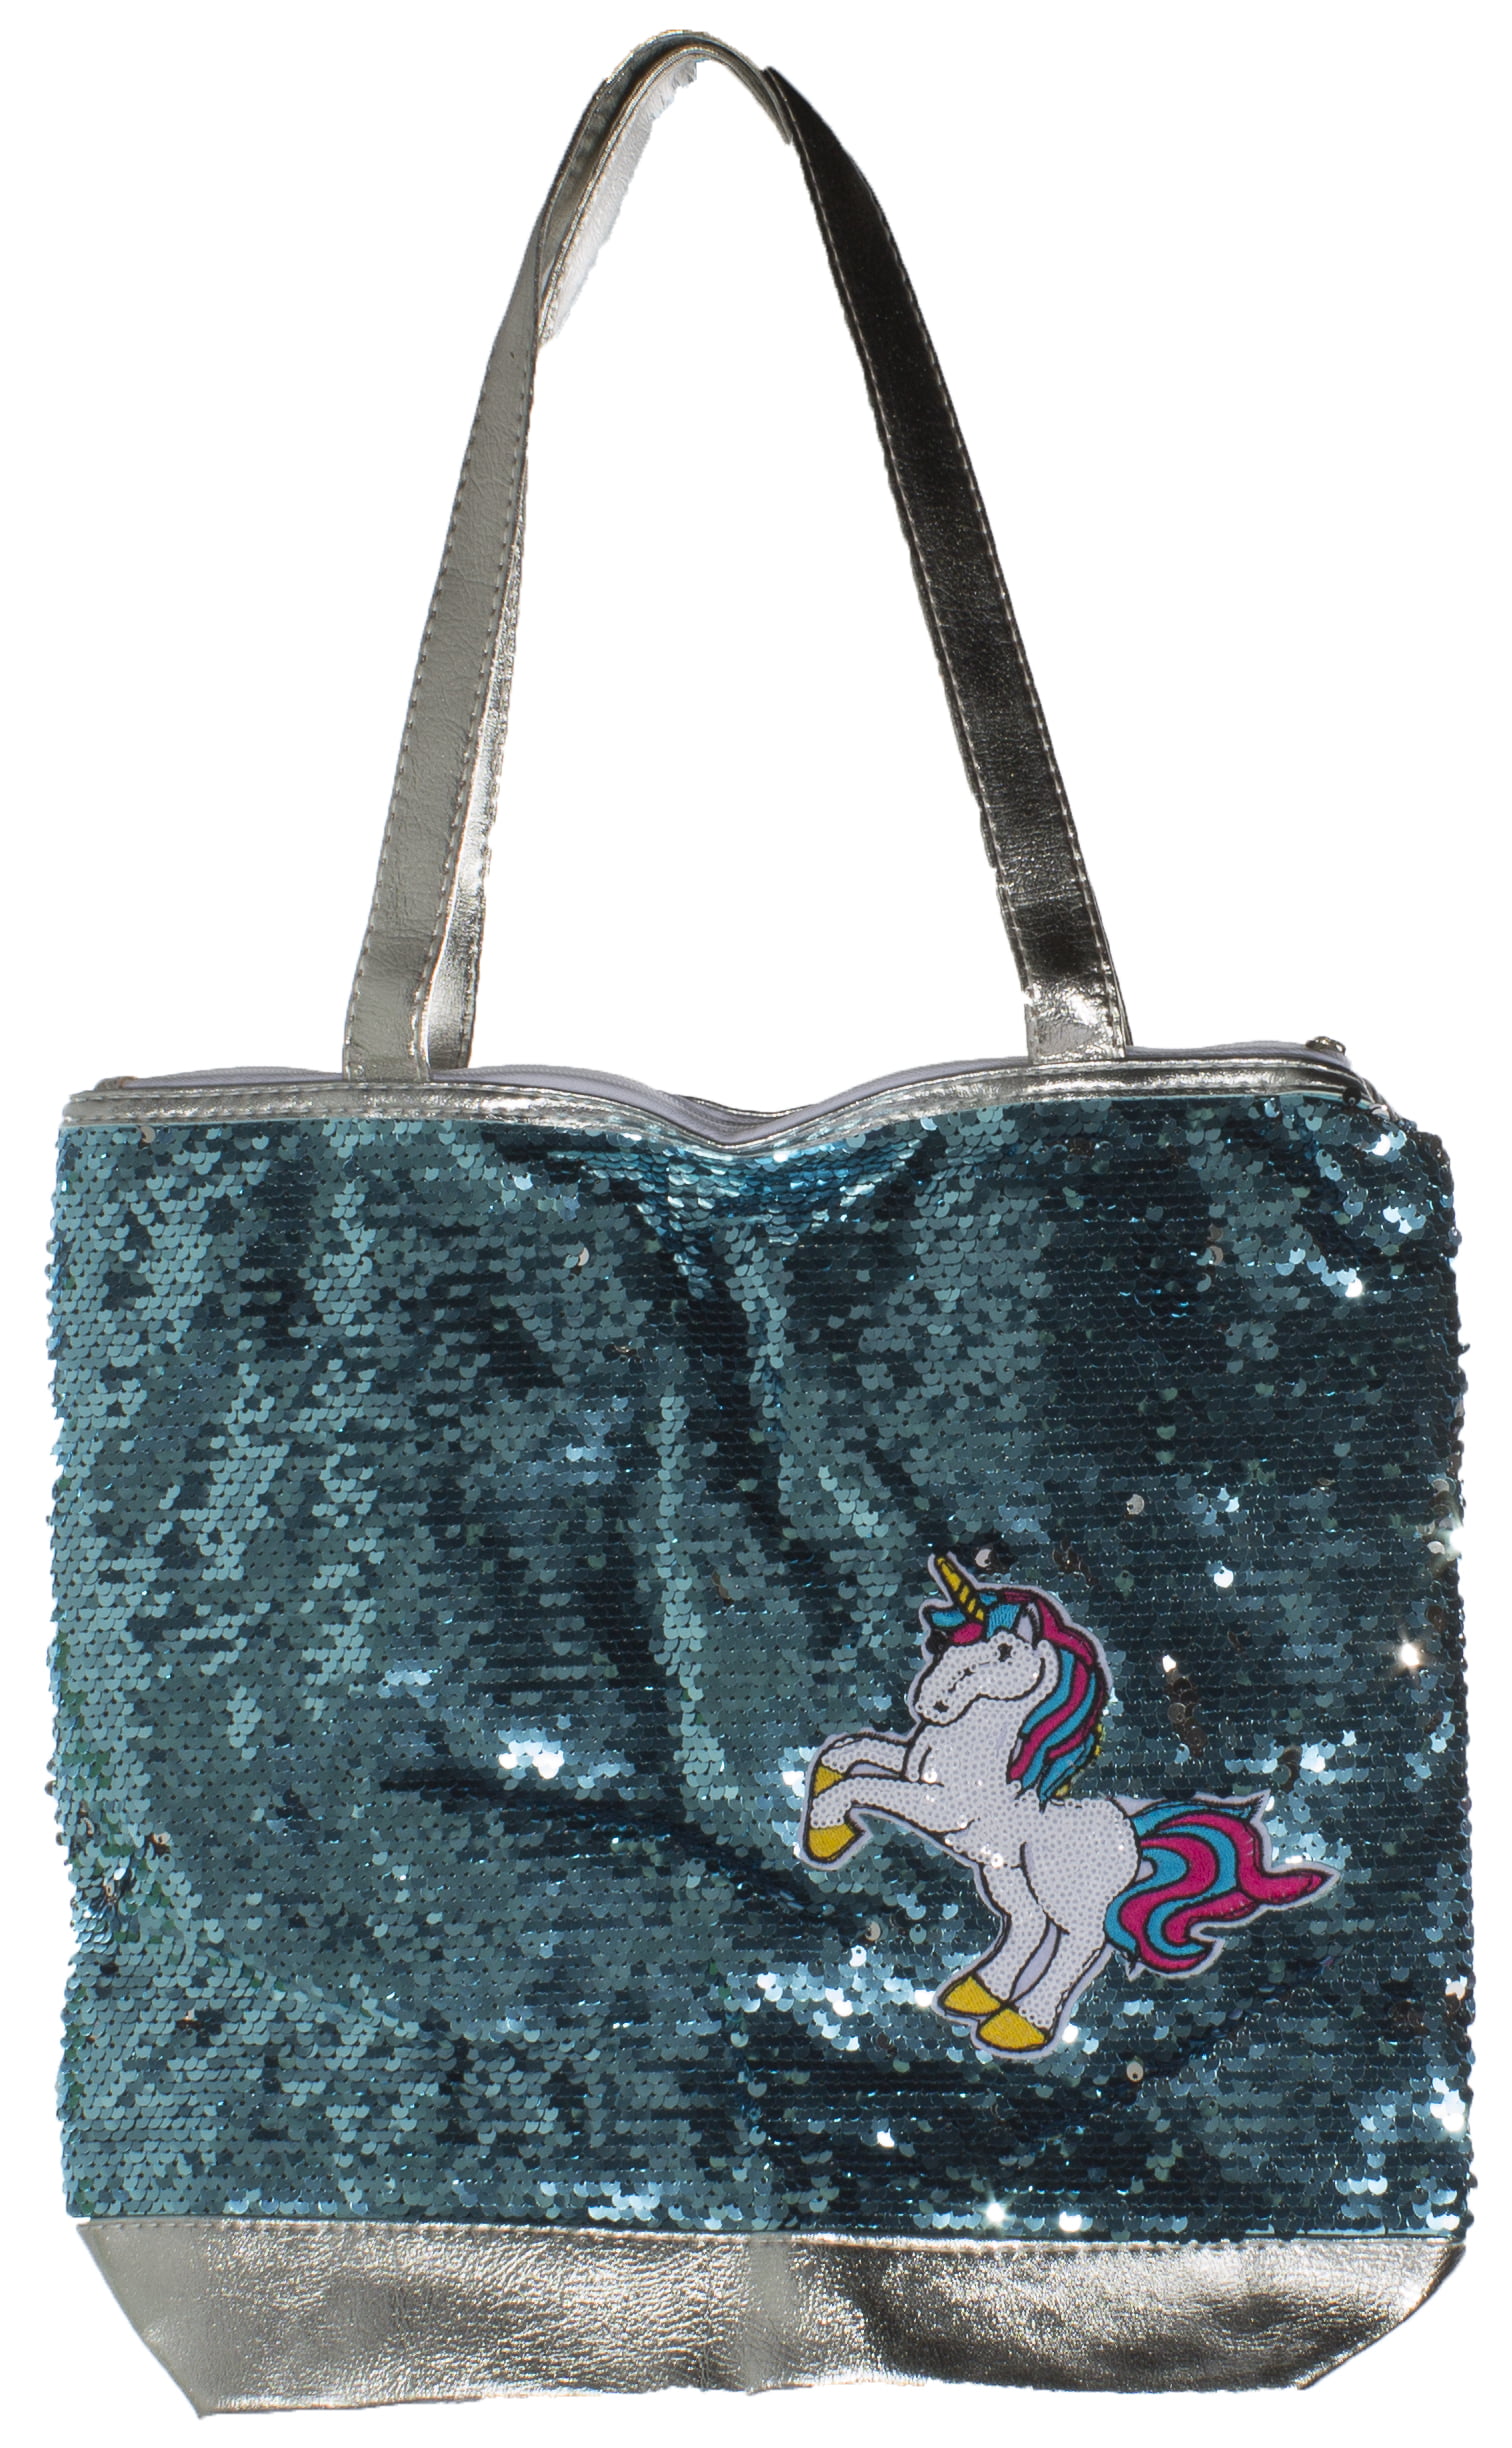 TY Fashion Flippy Sequin Purse - MOONLIGHT the Owl (8 inch): BBToyStore.com  - Toys, Plush, Trading Cards, Action Figures & Games online retail store  shop sale